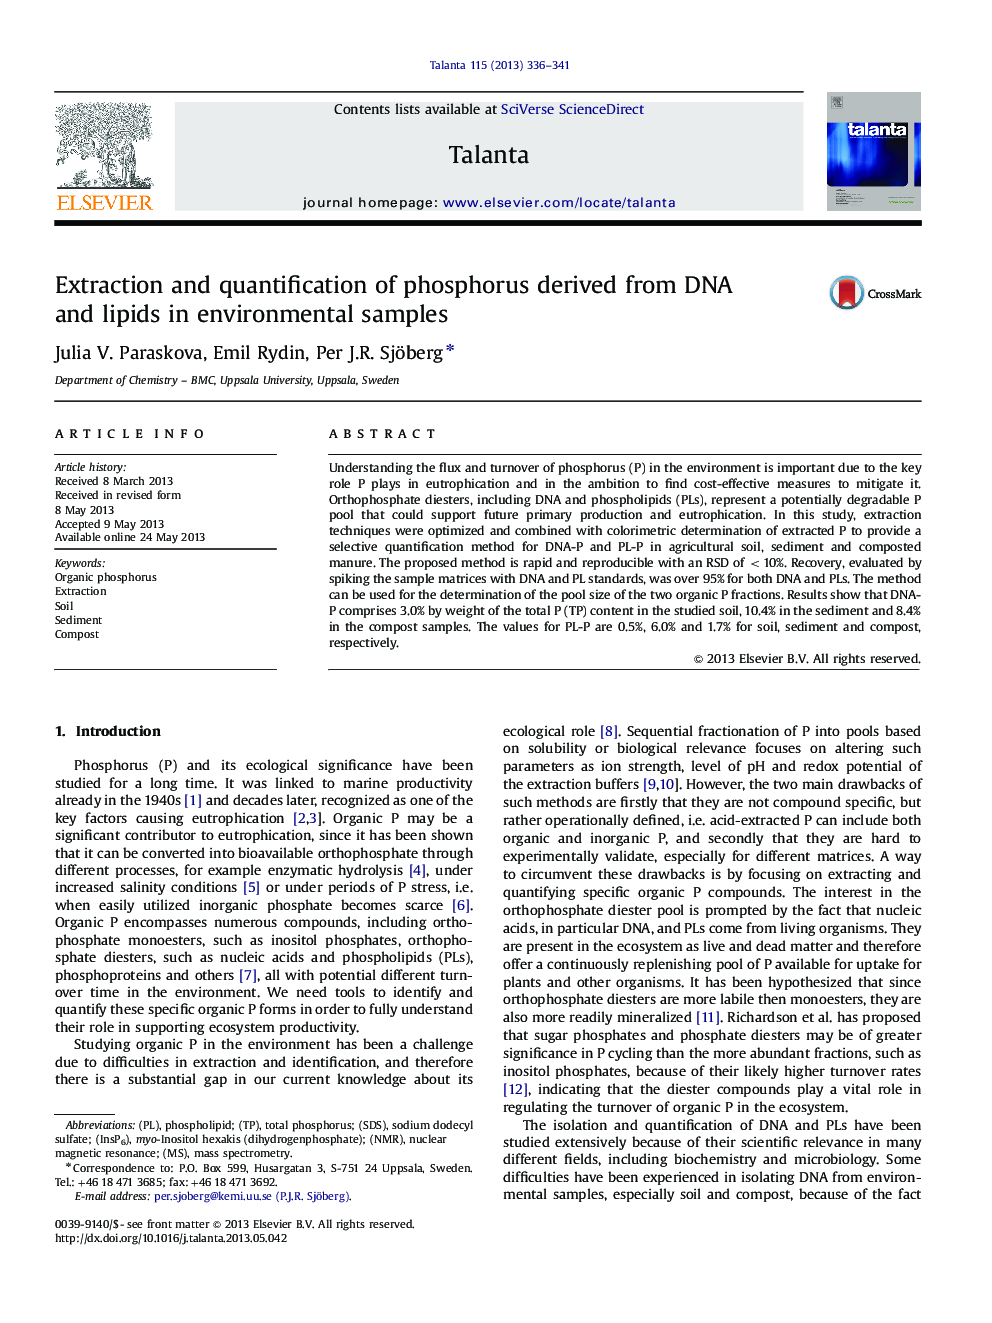 Extraction and quantification of phosphorus derived from DNA and lipids in environmental samples